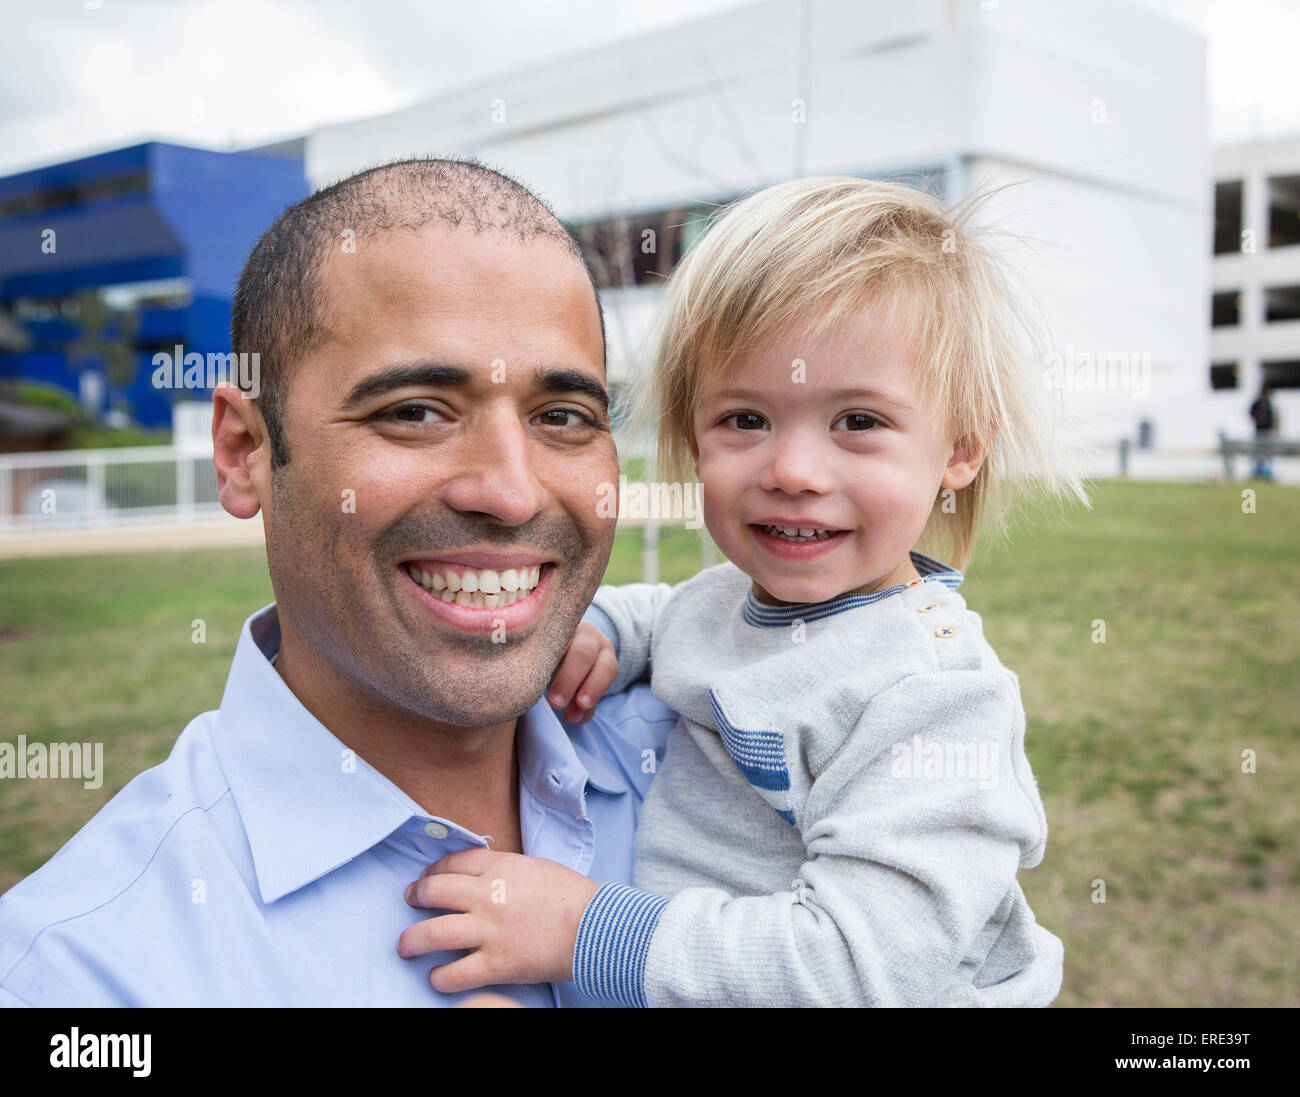 Hispanic father and son smiling in field Stock Photo